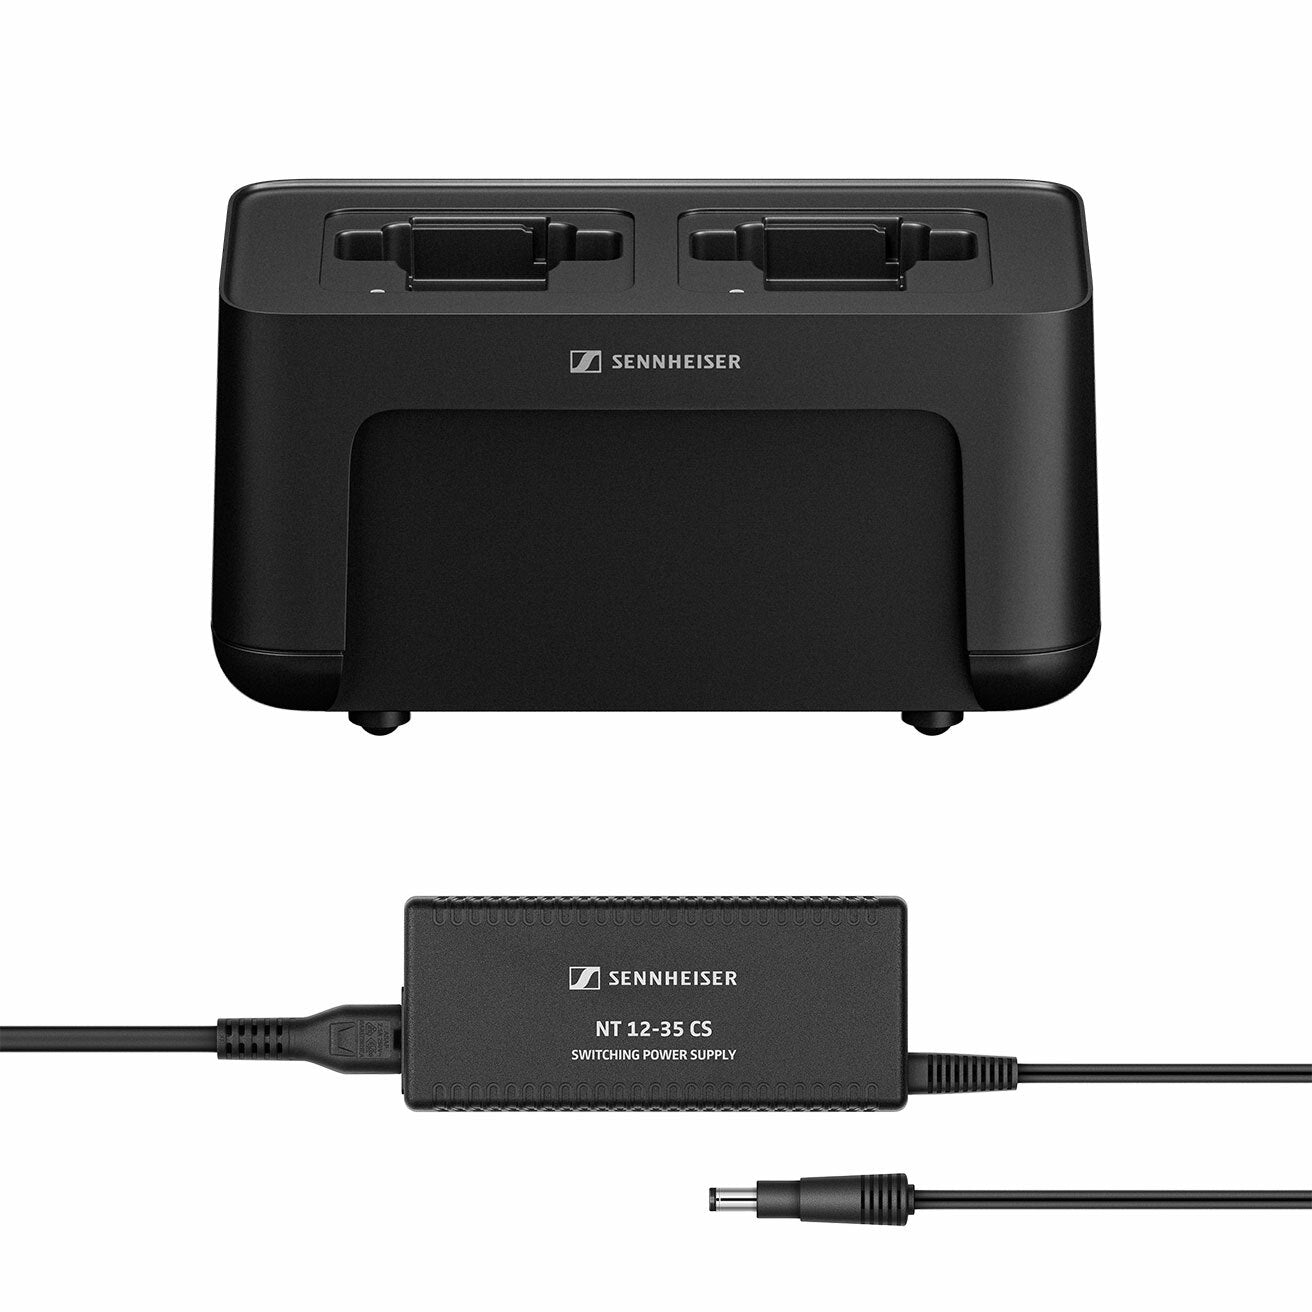 Sennheiser CHG 70N-C + PSU KIT - Network Enabled Charger with Power Supply